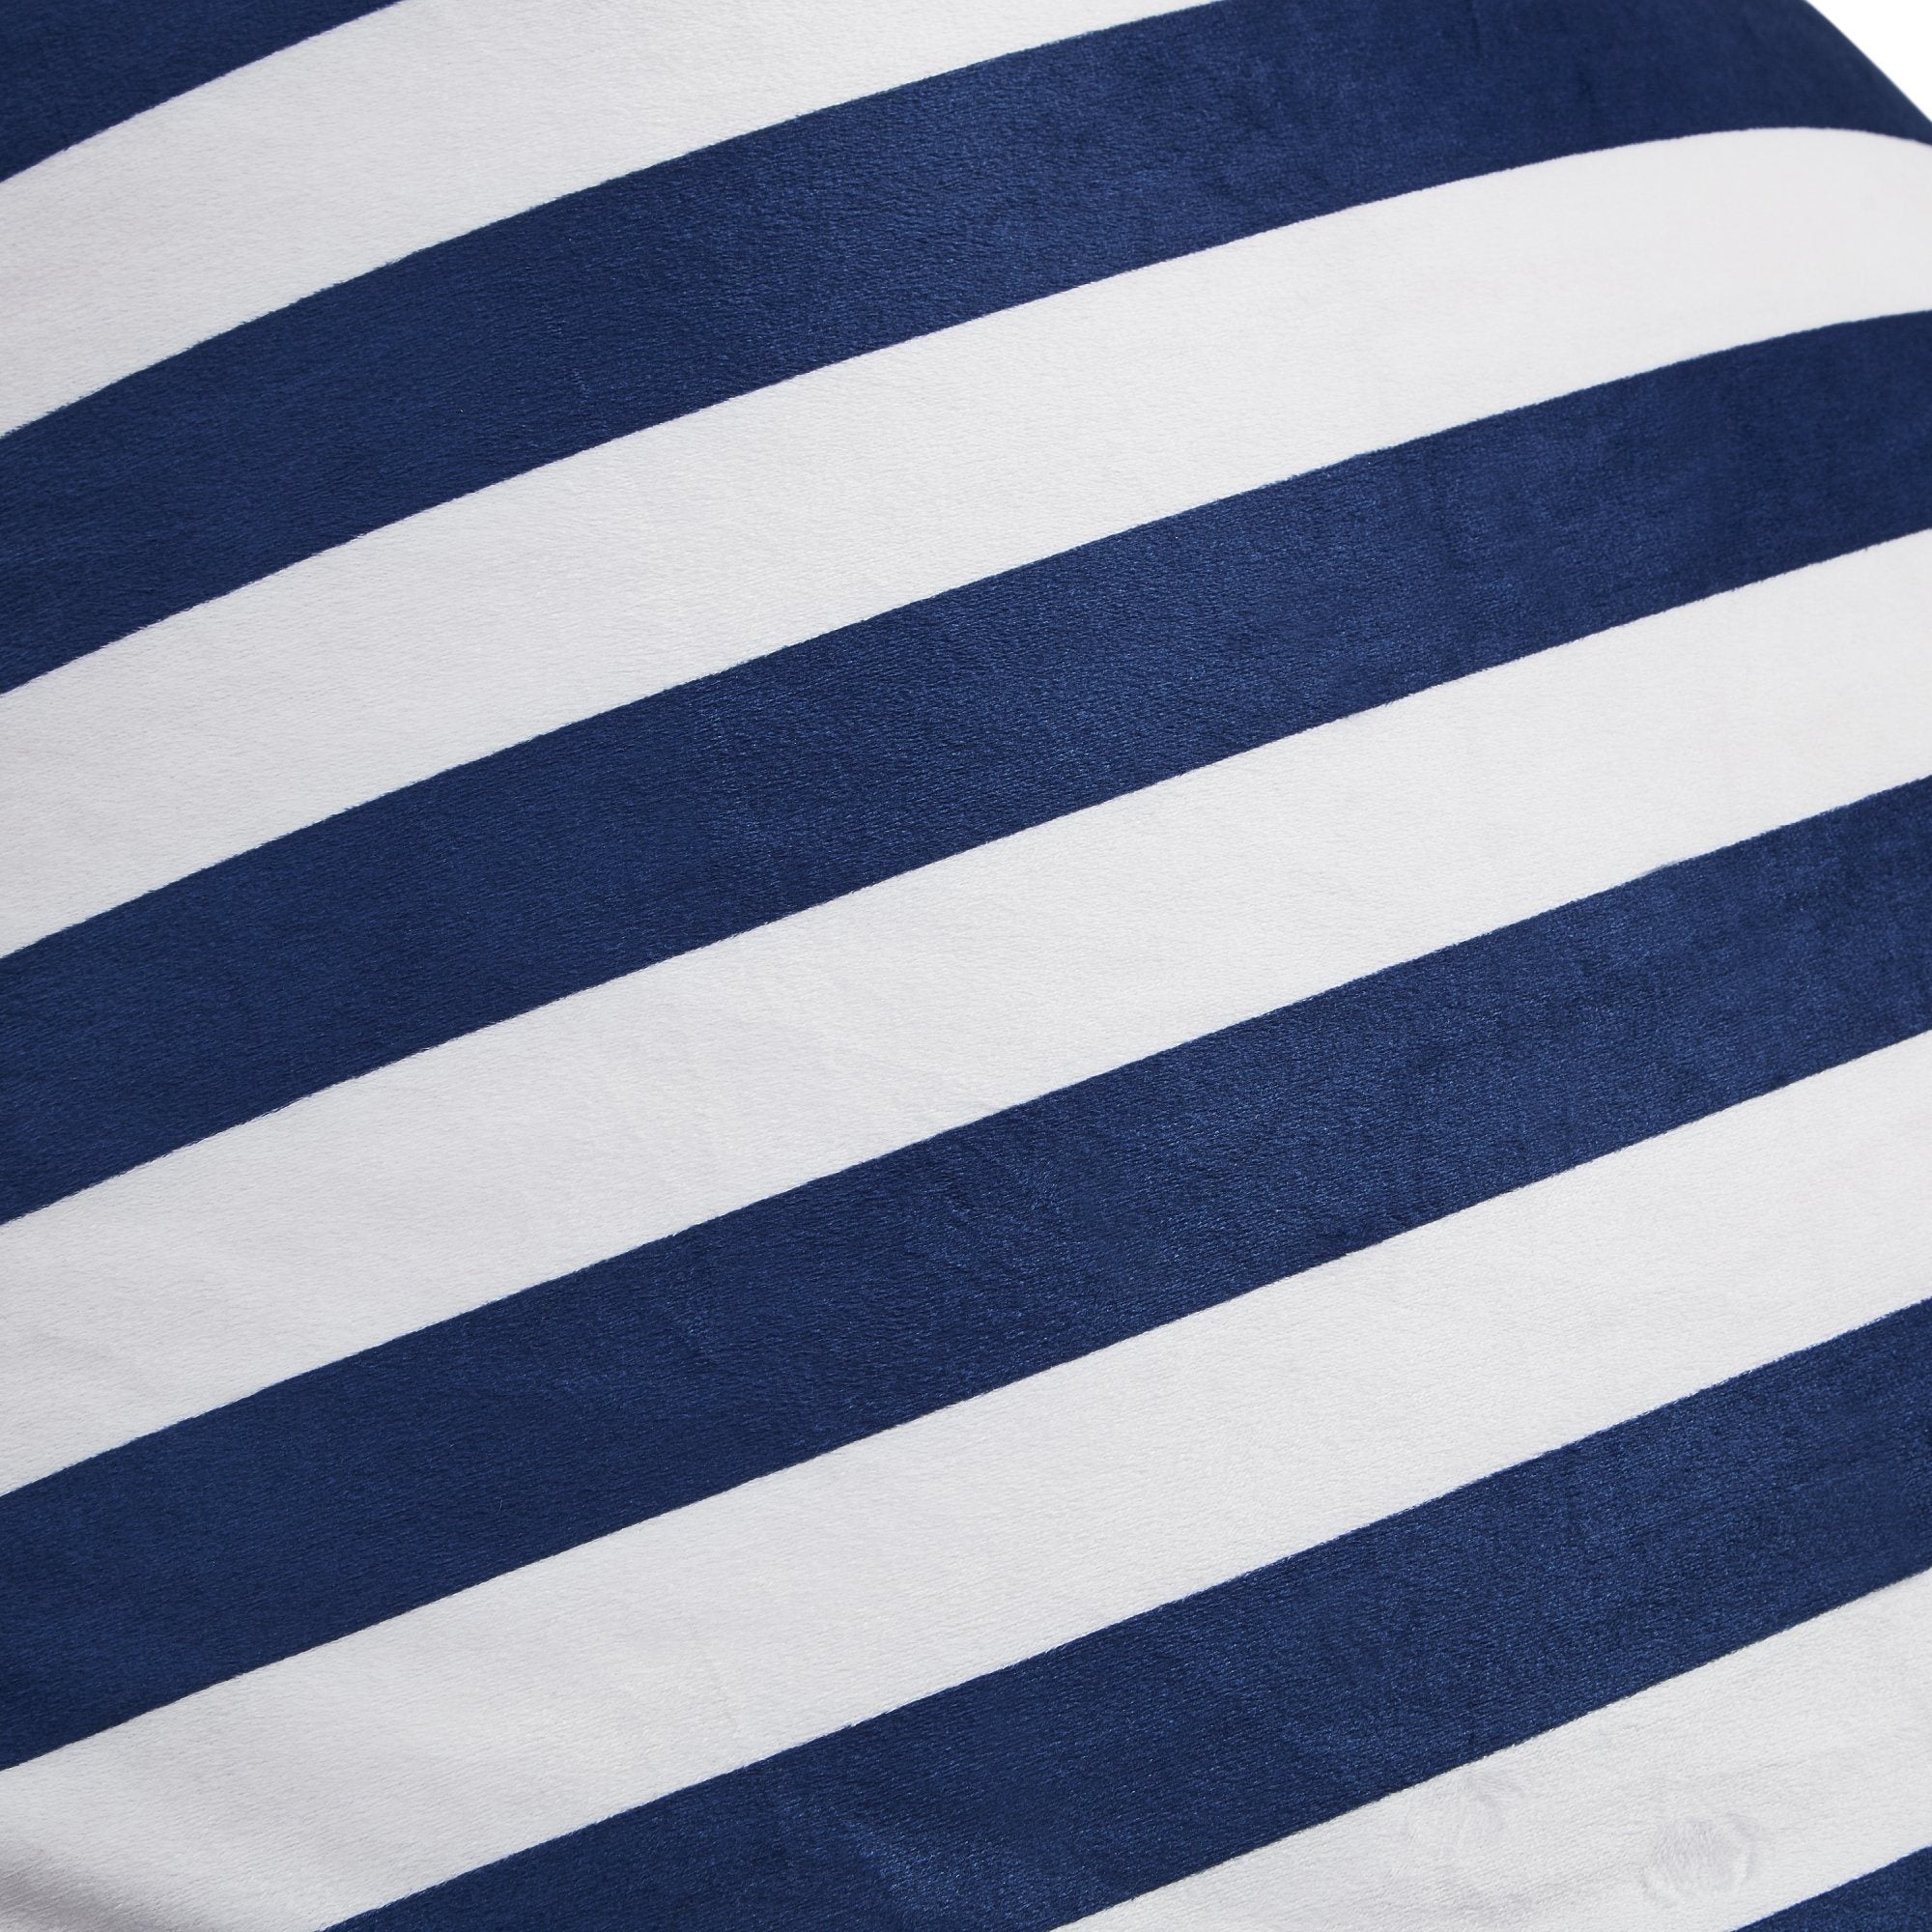 55 Bean Bag Cover Striped Navy by Loungie